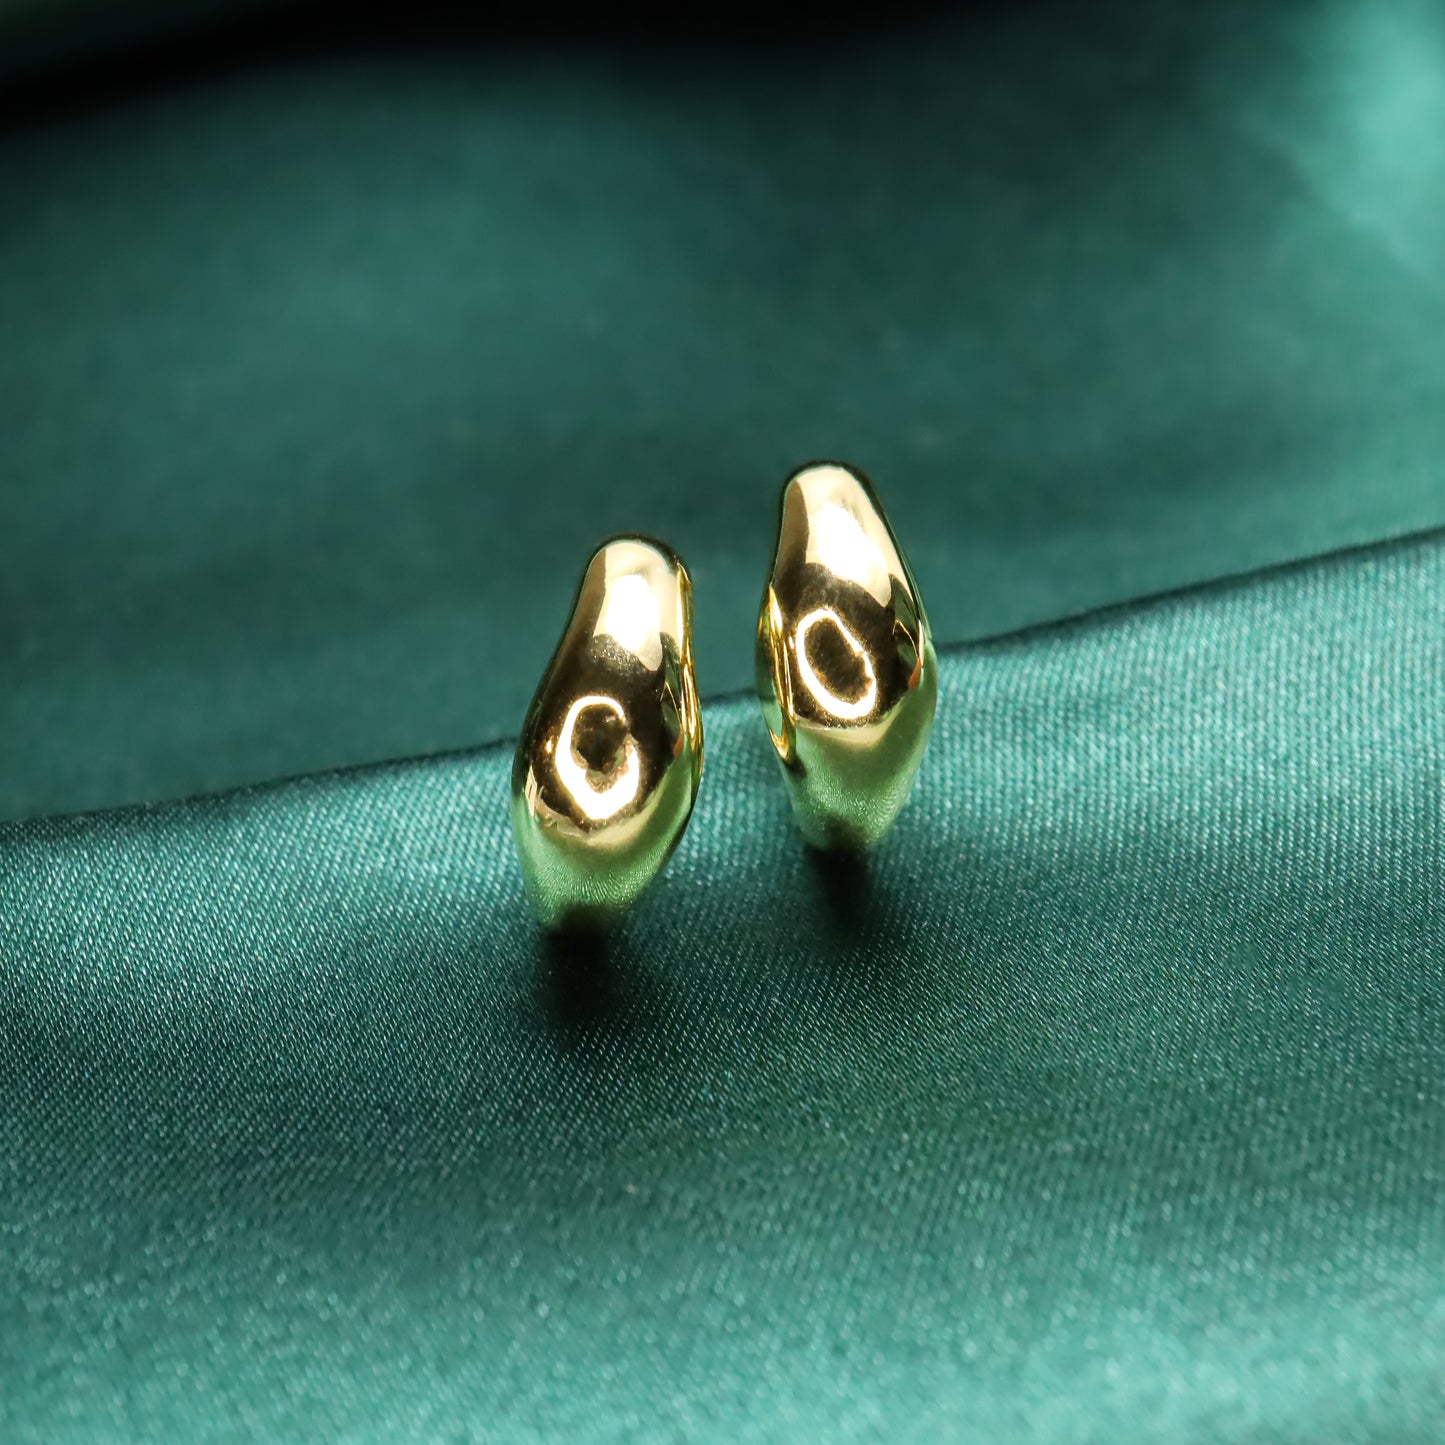 Vintage C Shape Gold Plated S925 Sterling Silver Stud Earrings